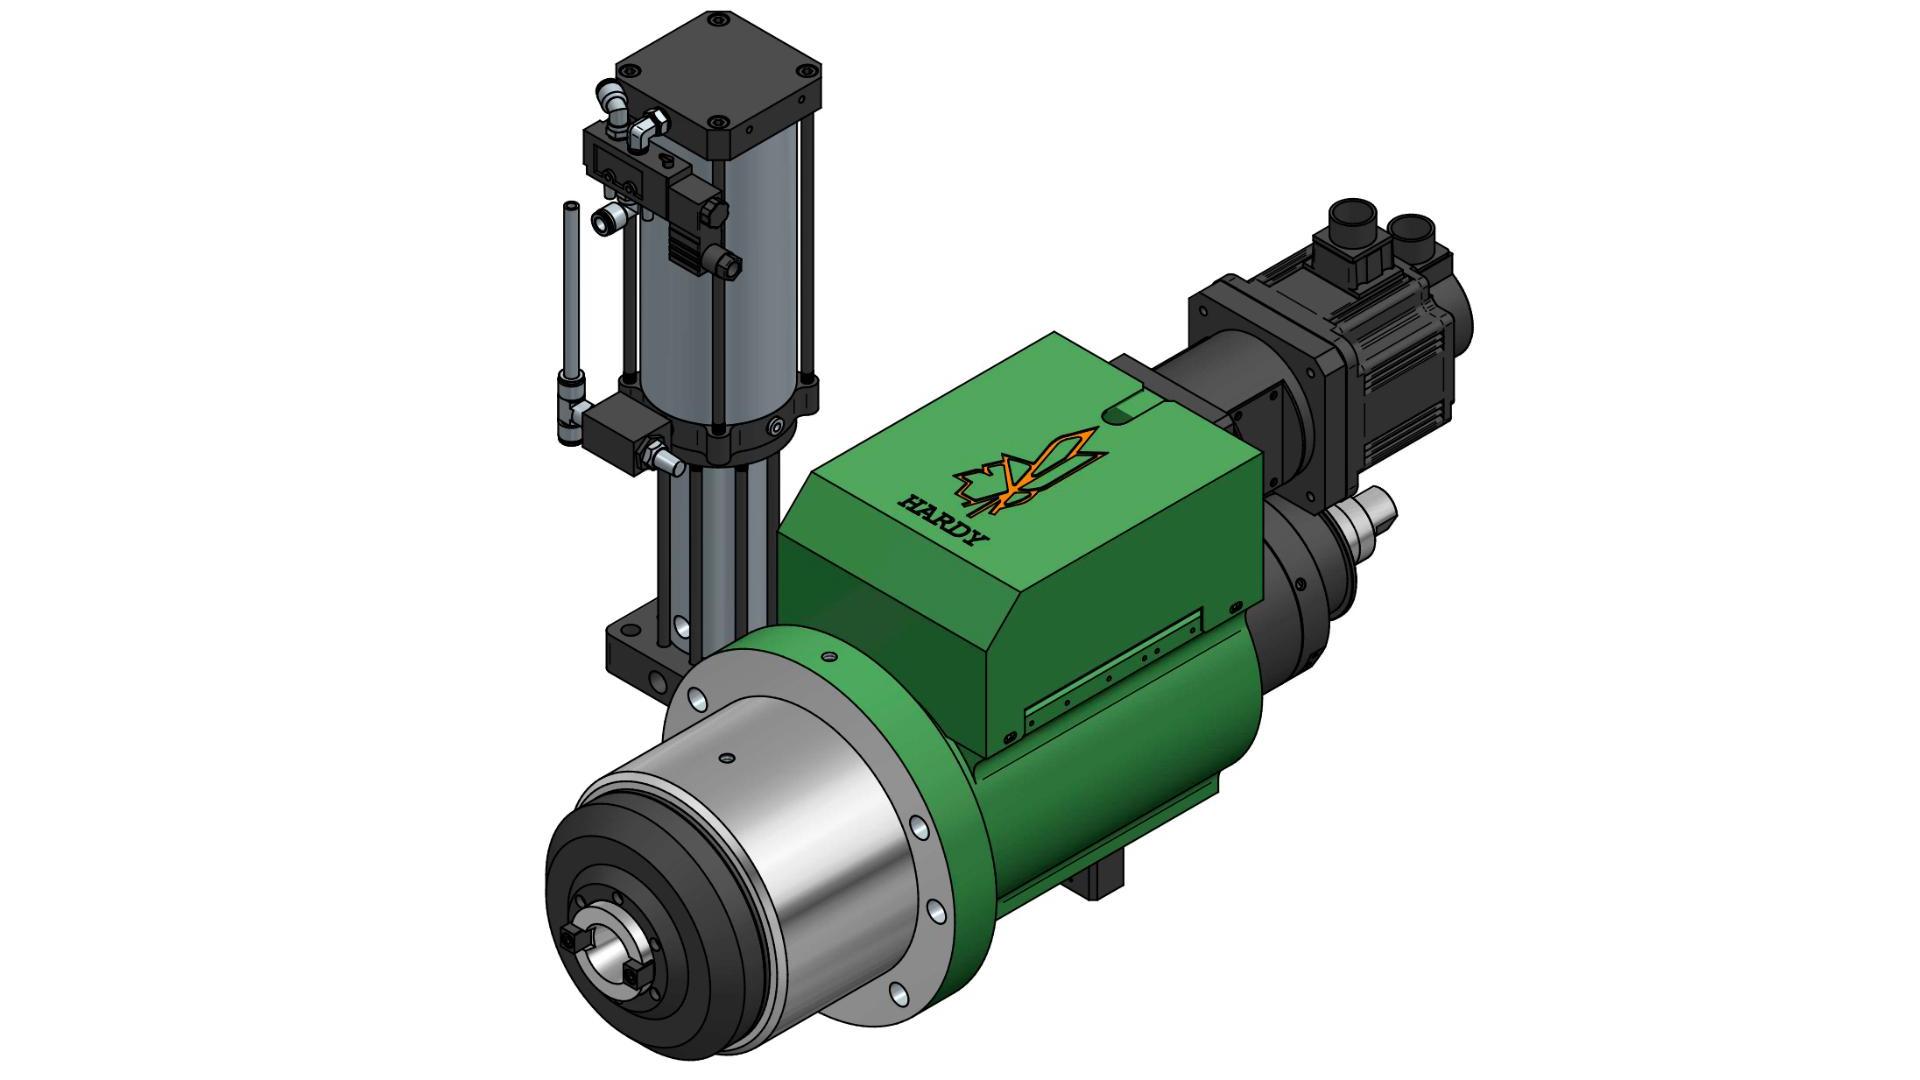 Built-in Motor Drilling Tapping Spindle with ATC